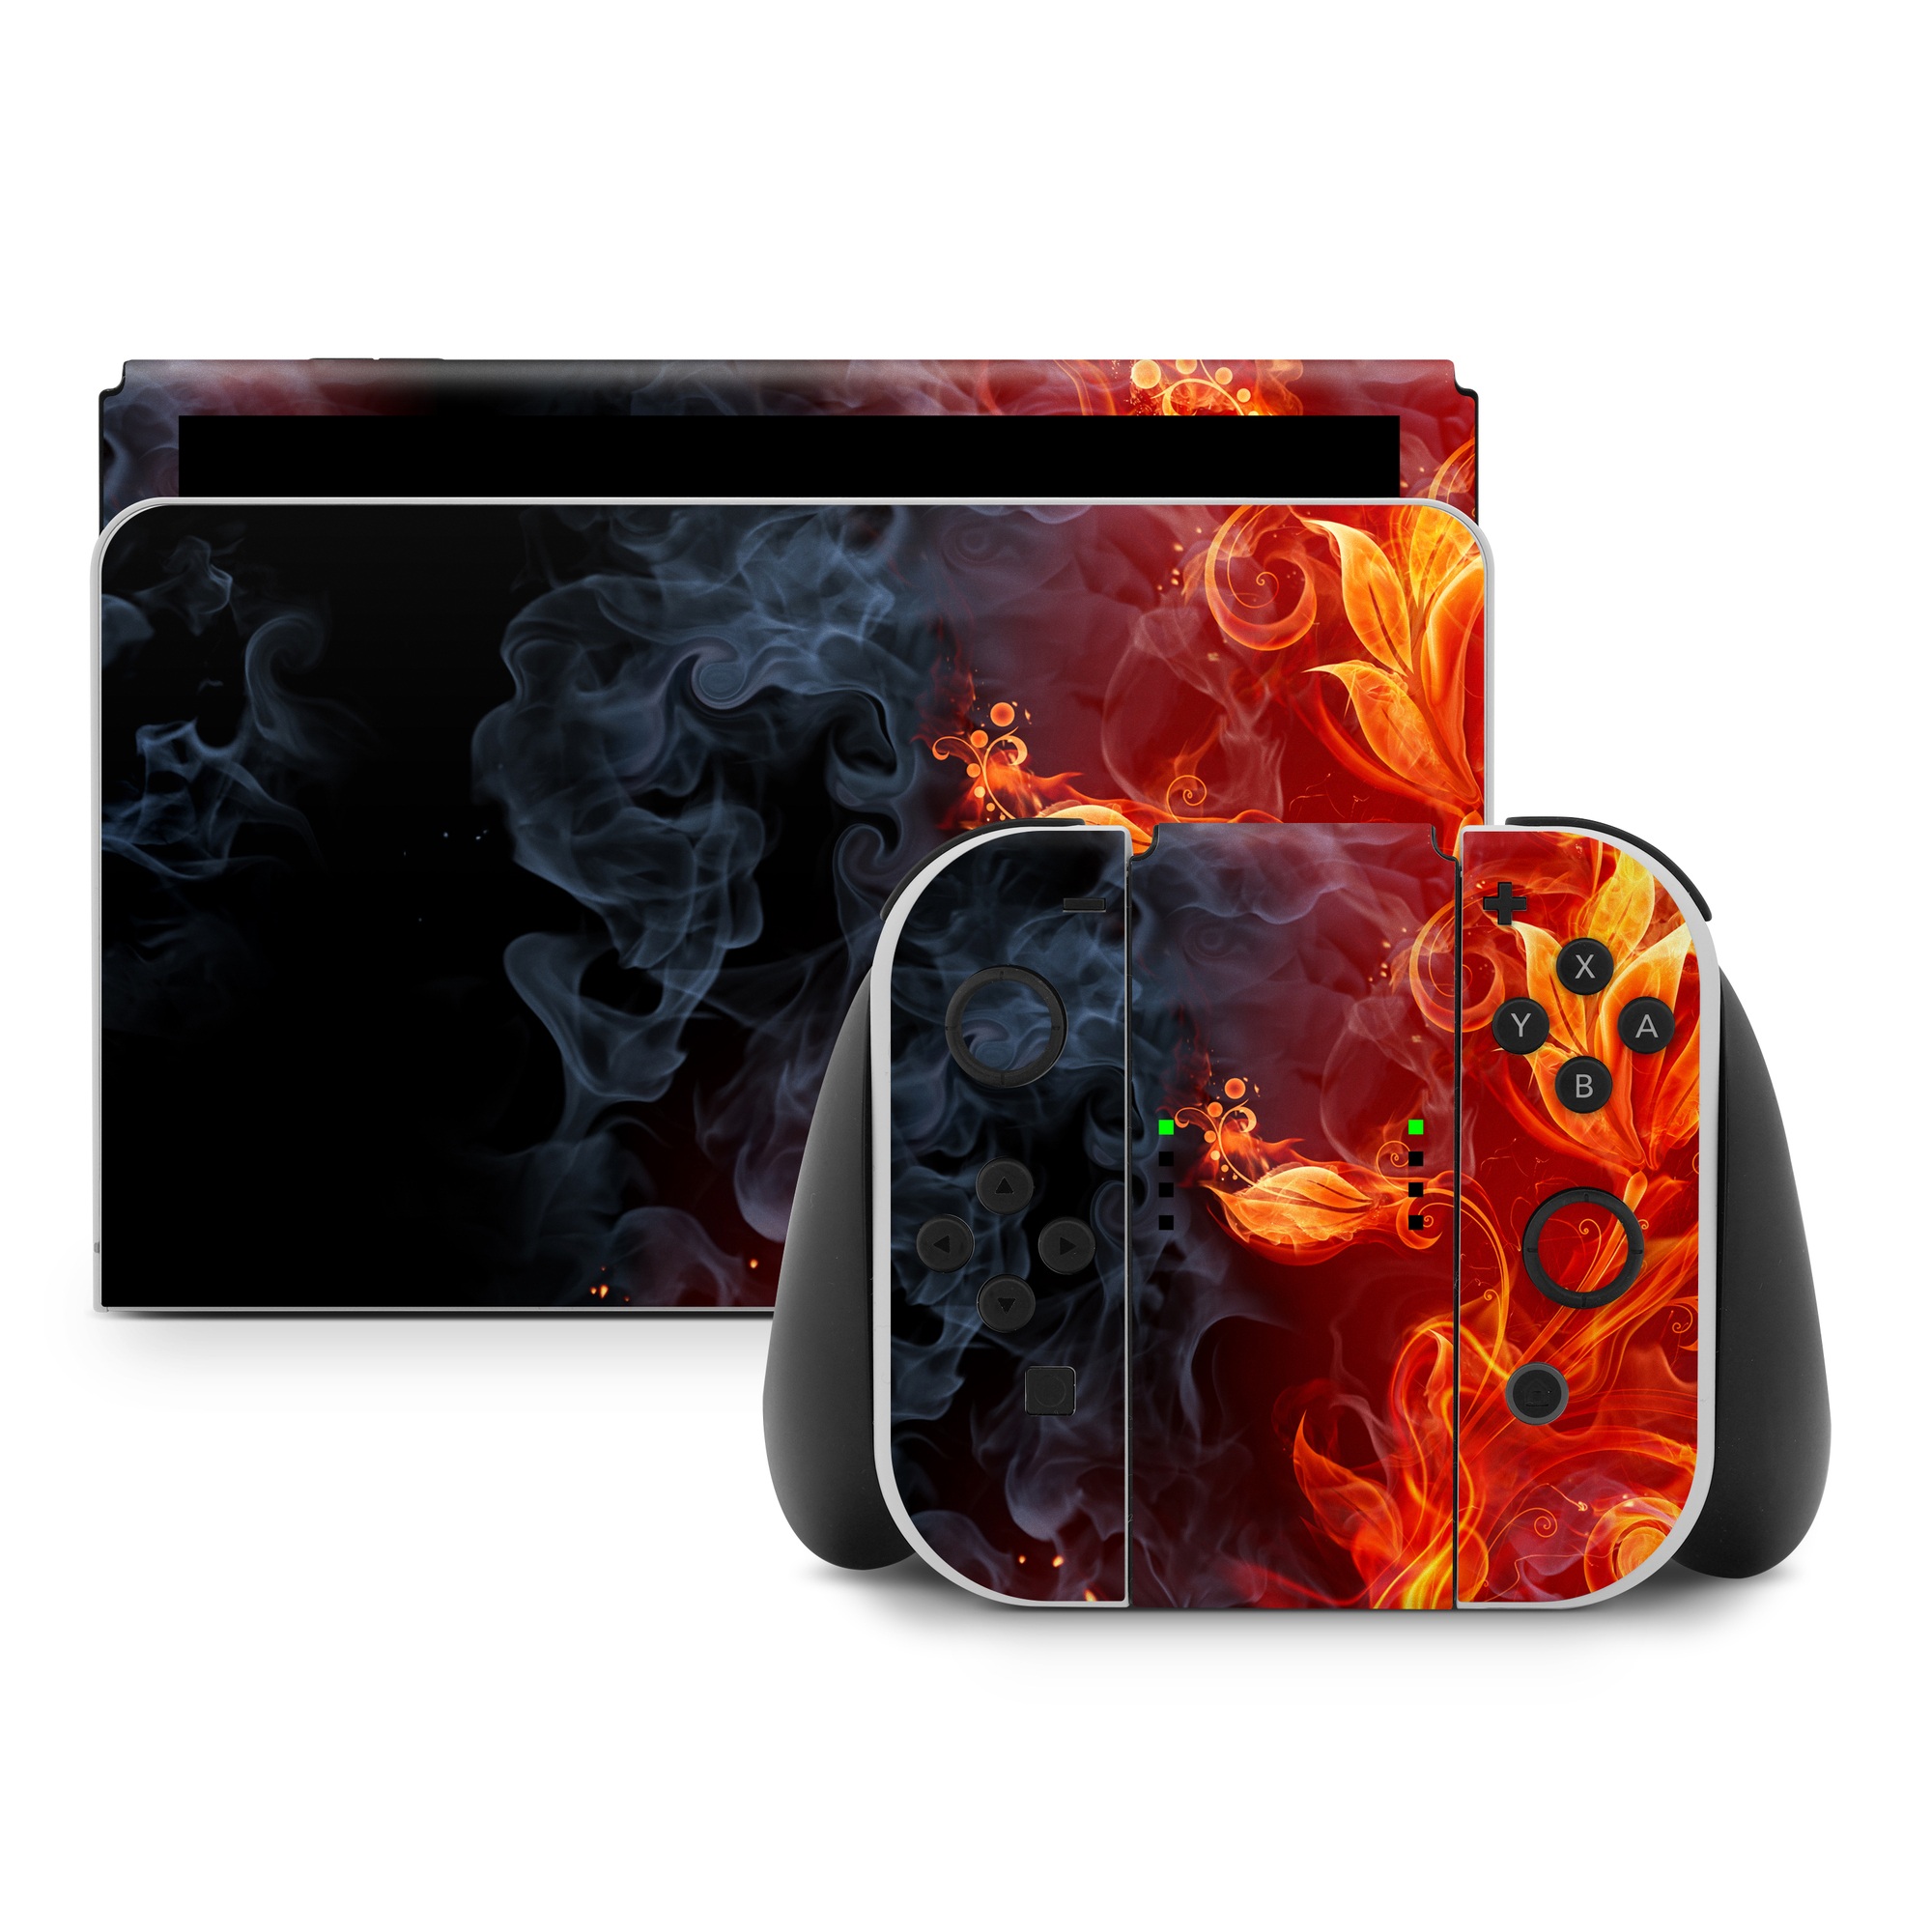 Nintendo Switch Skin - Flower Of Fire by Gaming | DecalGirl